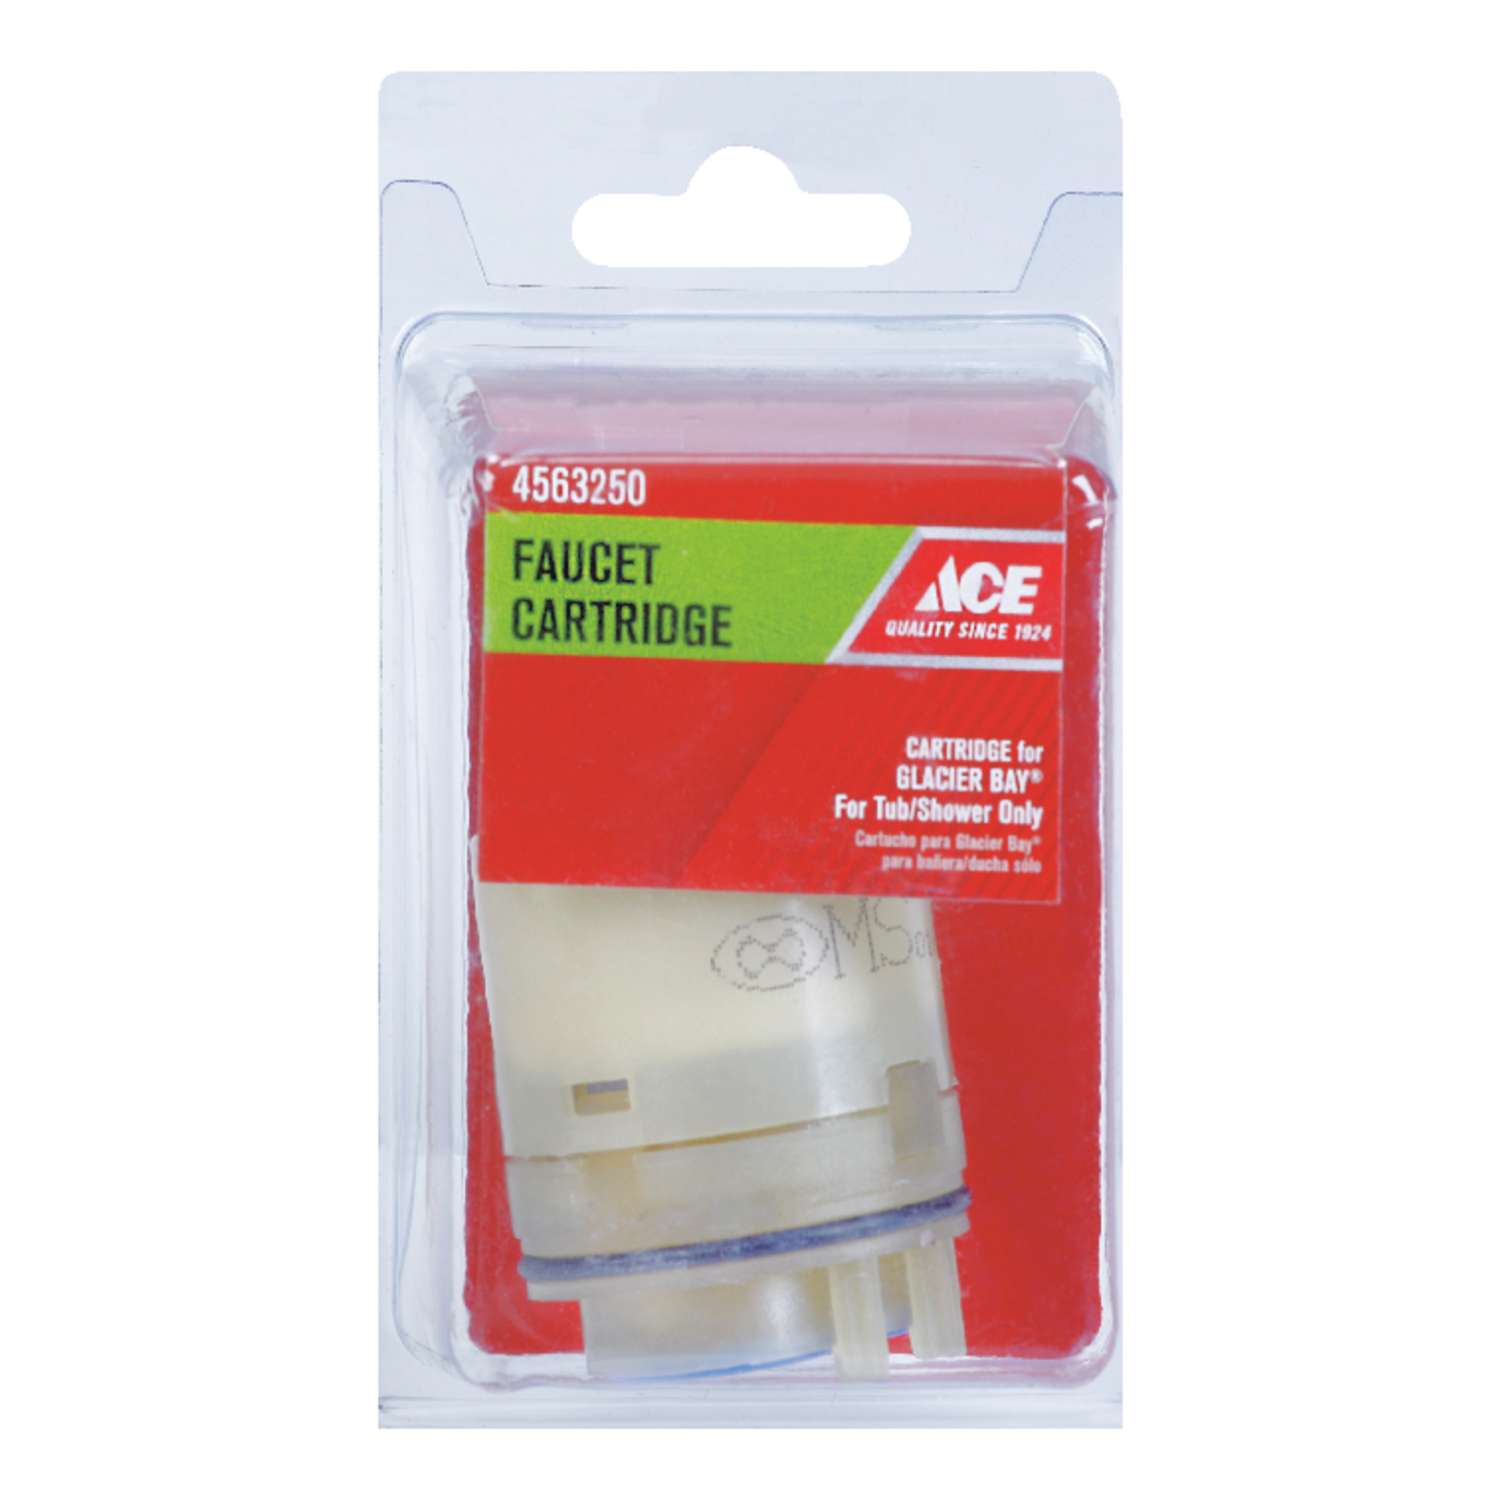 Ace Hot And Cold Faucet Cartridge For Glacier Bay Ace Hardware